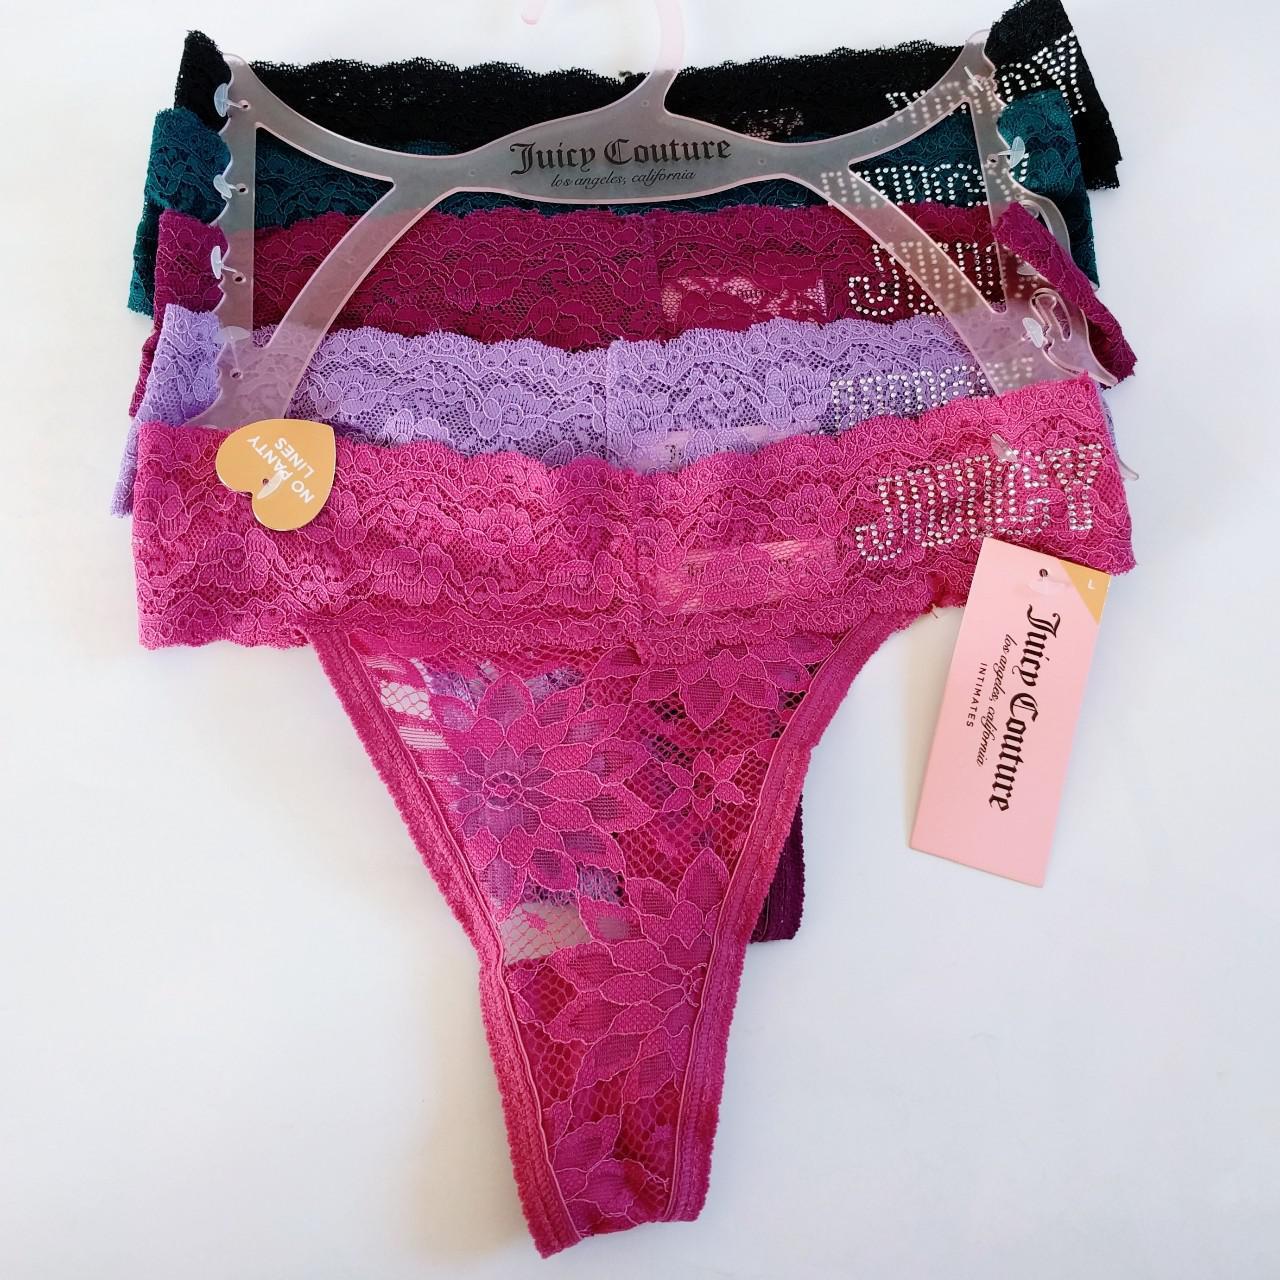 Juicy Couture 5-piece Lace Thong Briefs Set in Pink